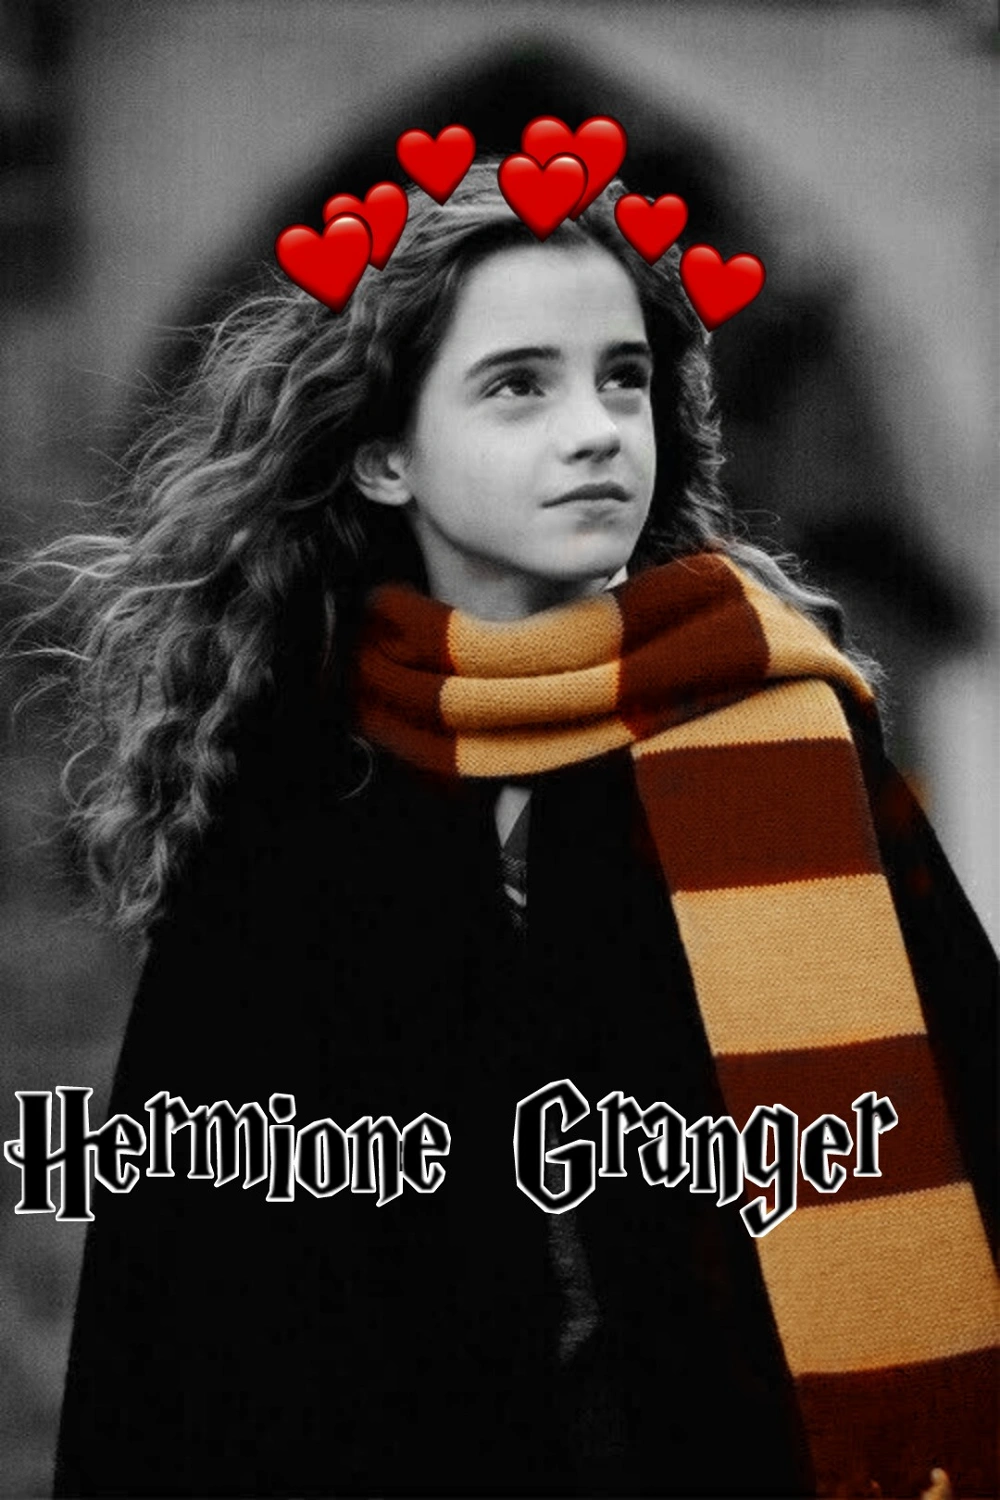 Hermione is one of